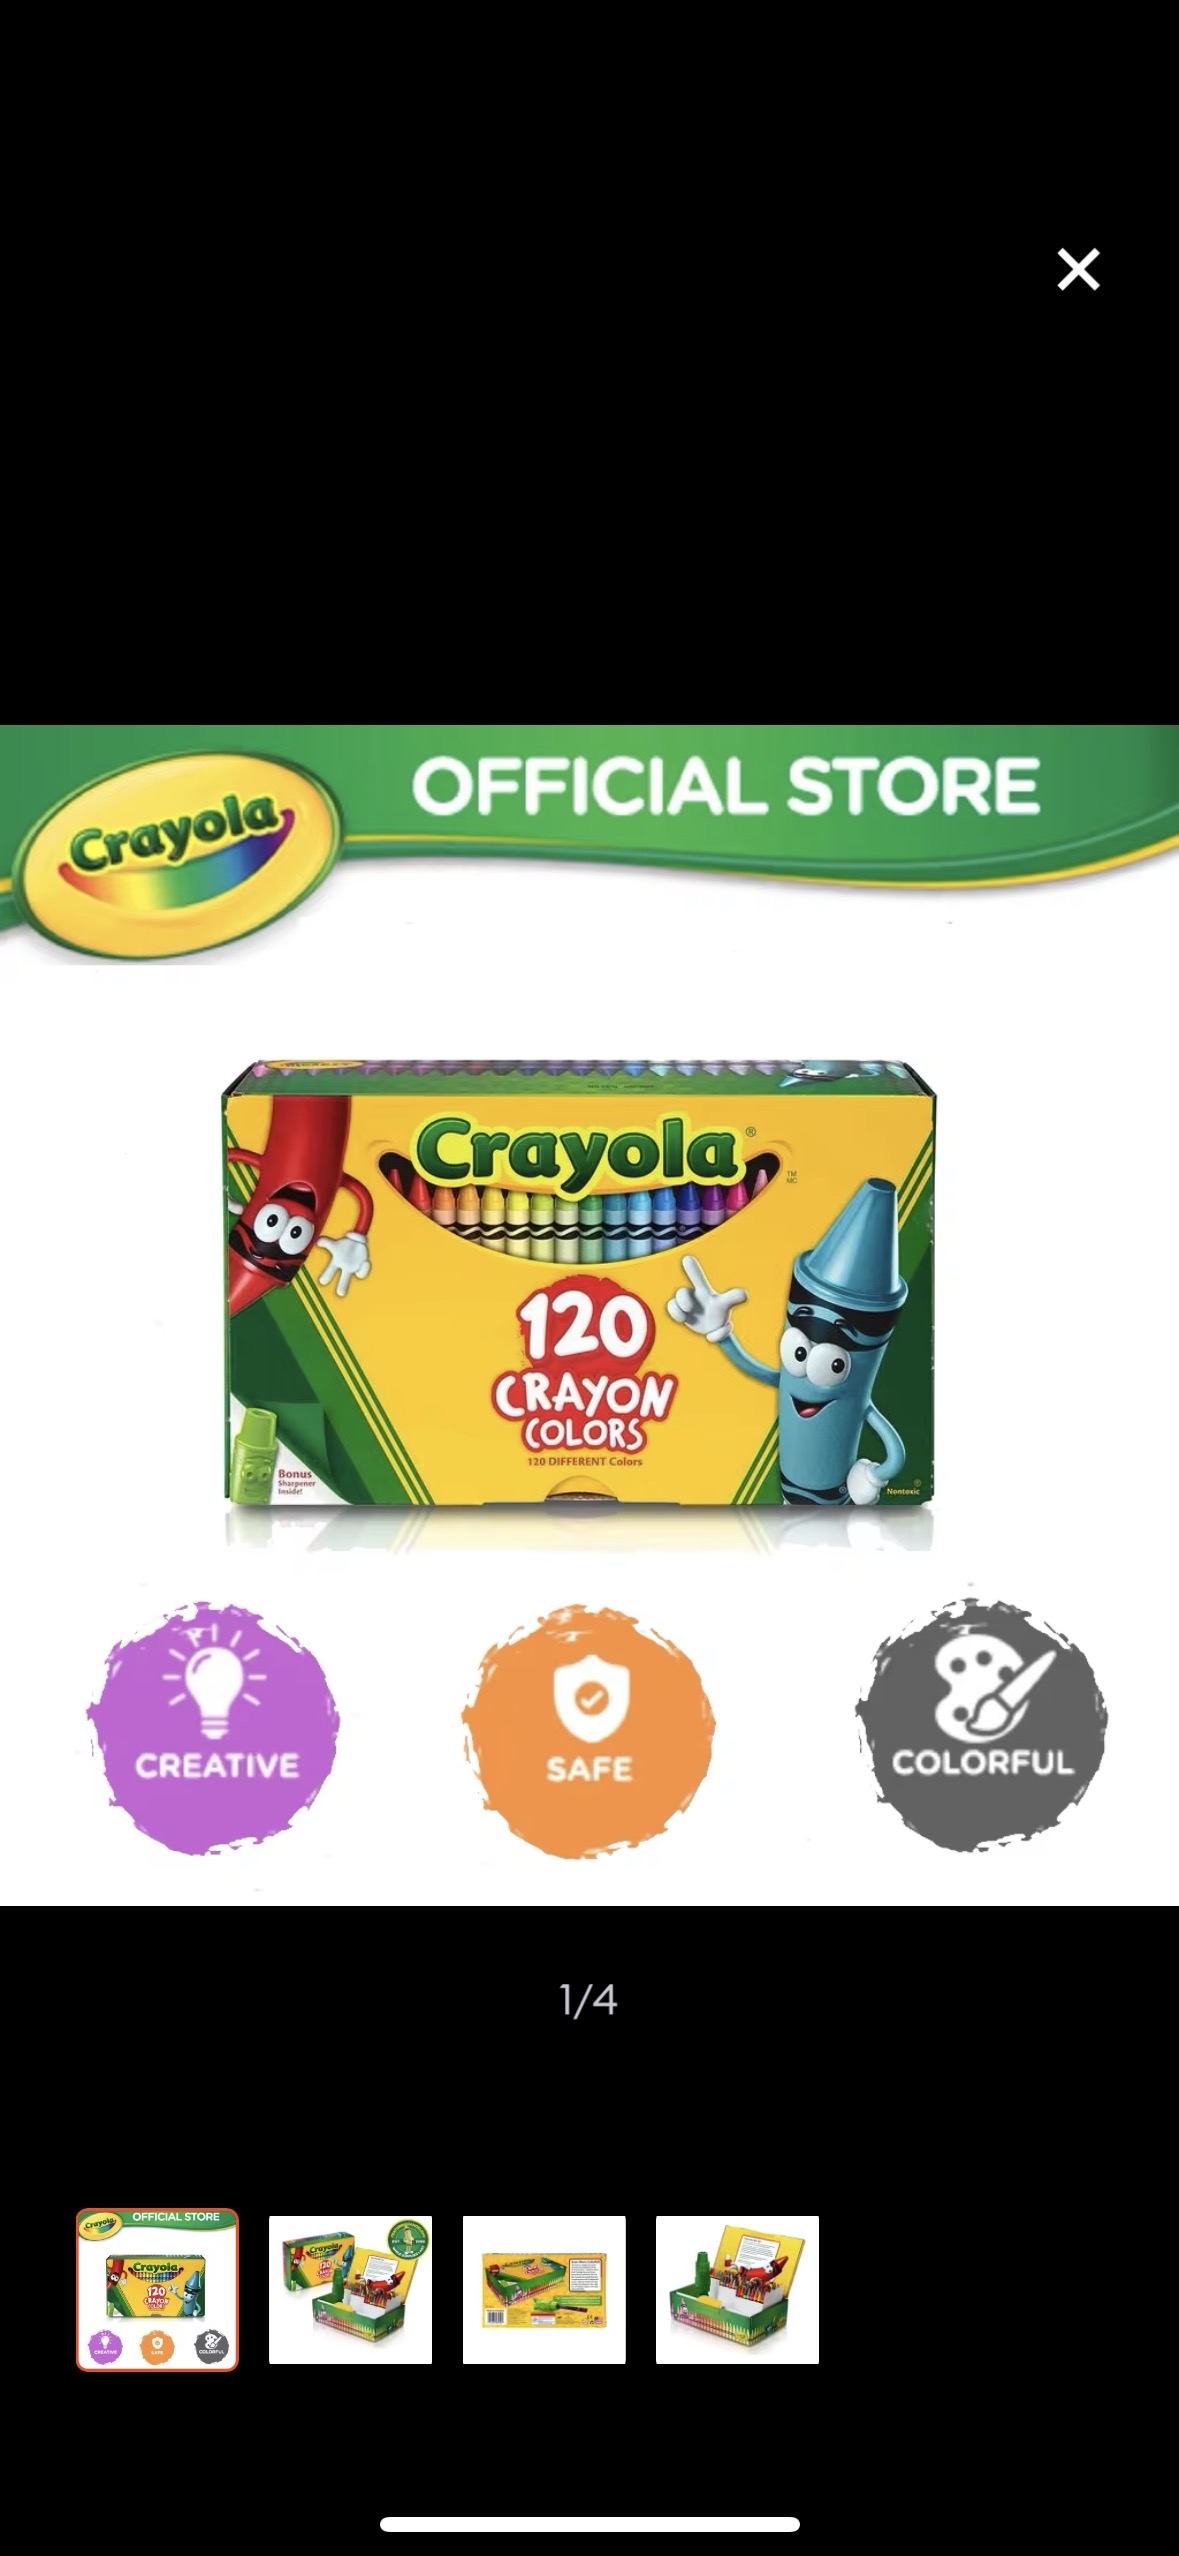 Crayola Crayons, 120 Count, Coloring Supplies, Gift for Kids